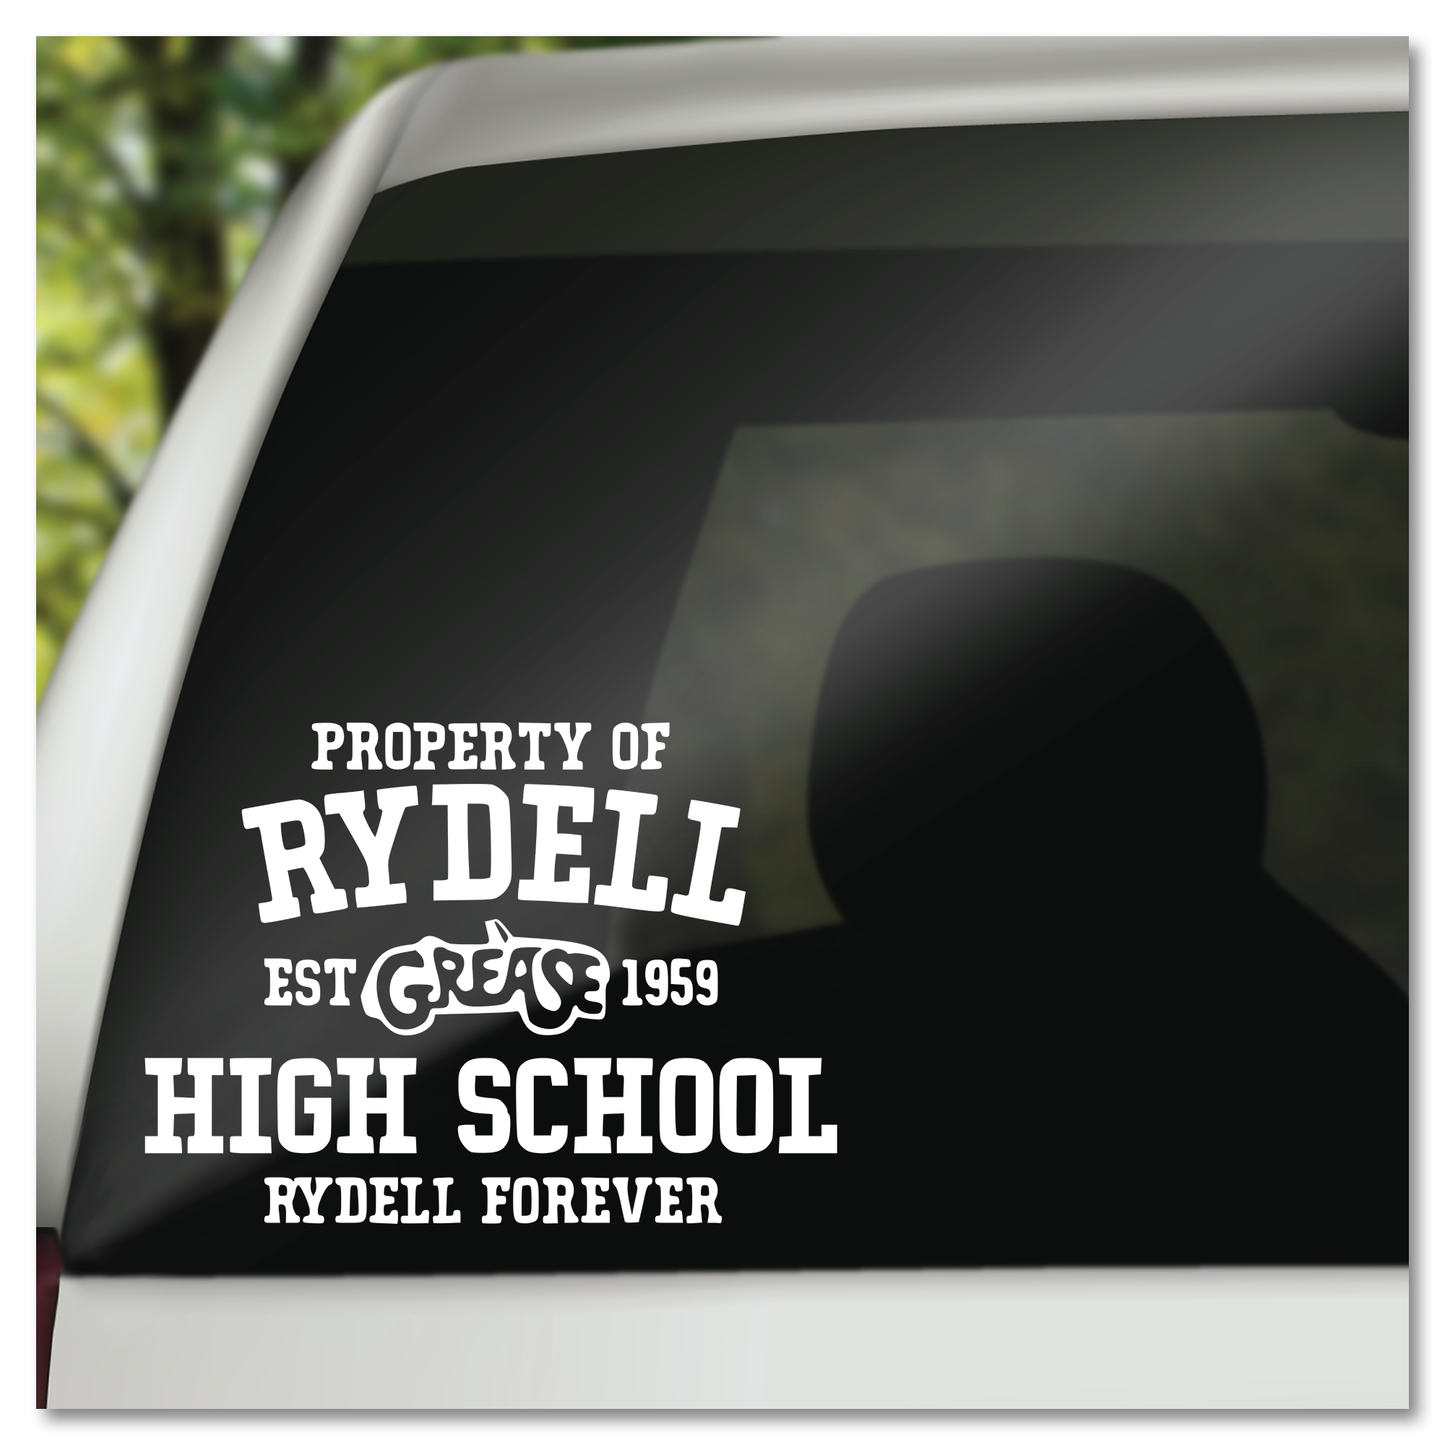 Property Of Rydell High School Grease Vinyl Decal Sticker